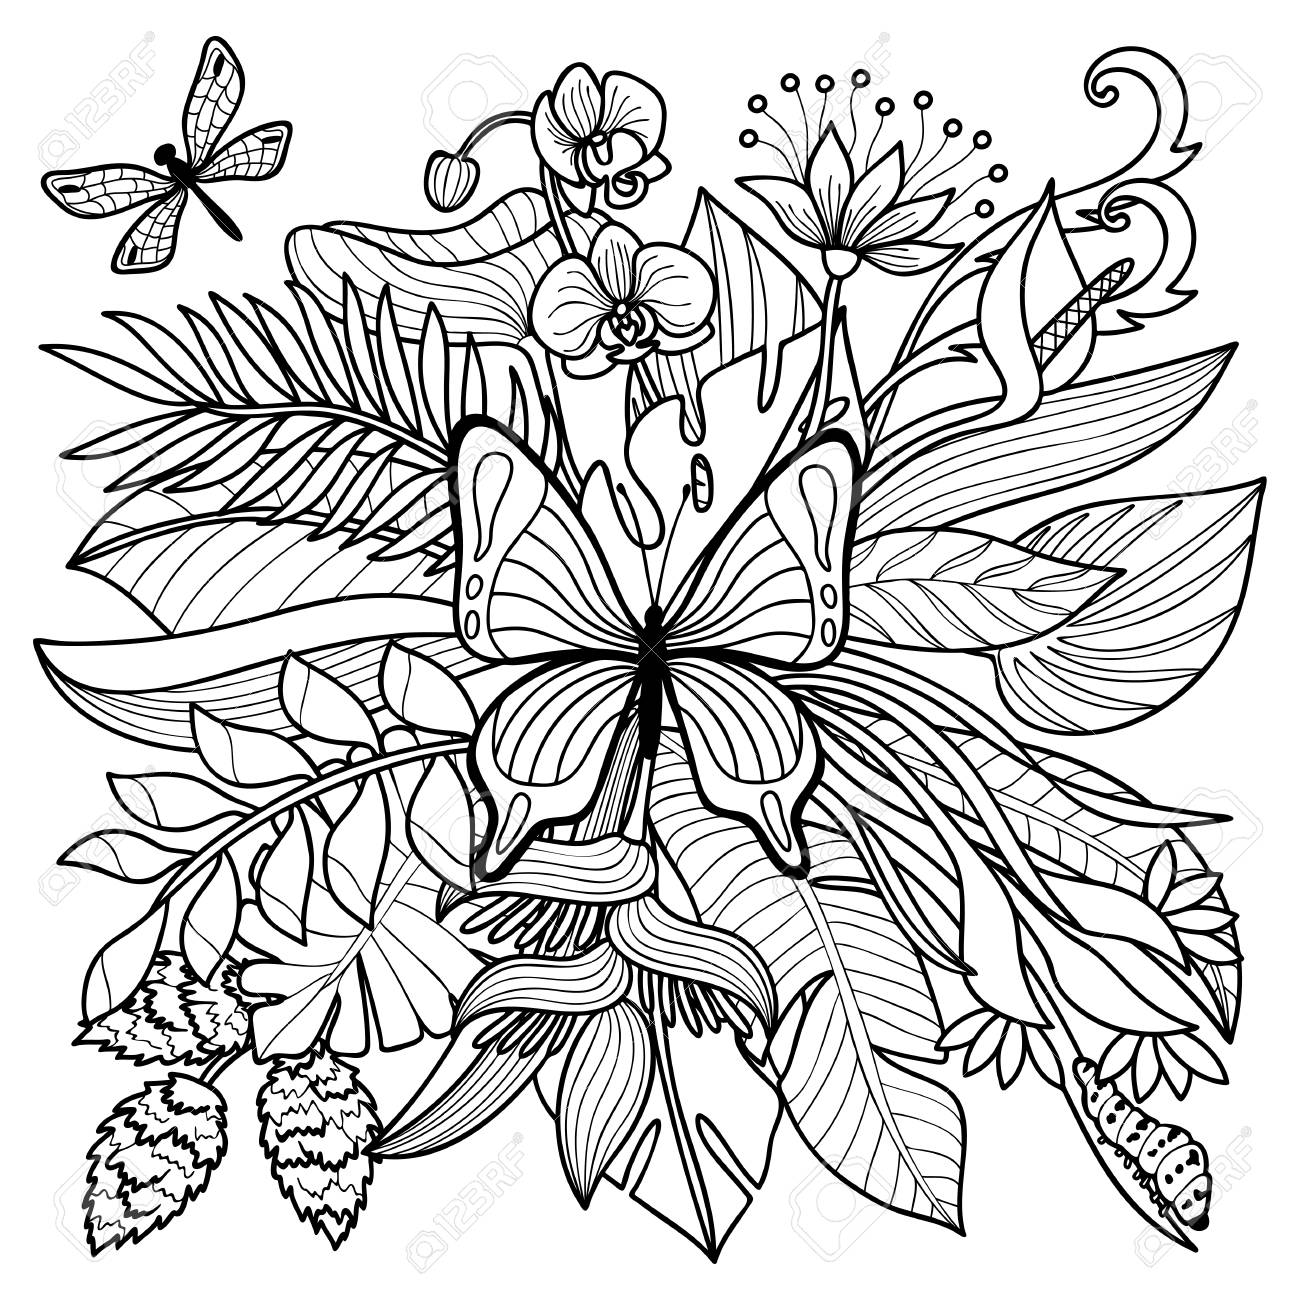 Tropical coloring page royalty free svg cliparts vectors and stock illustration image